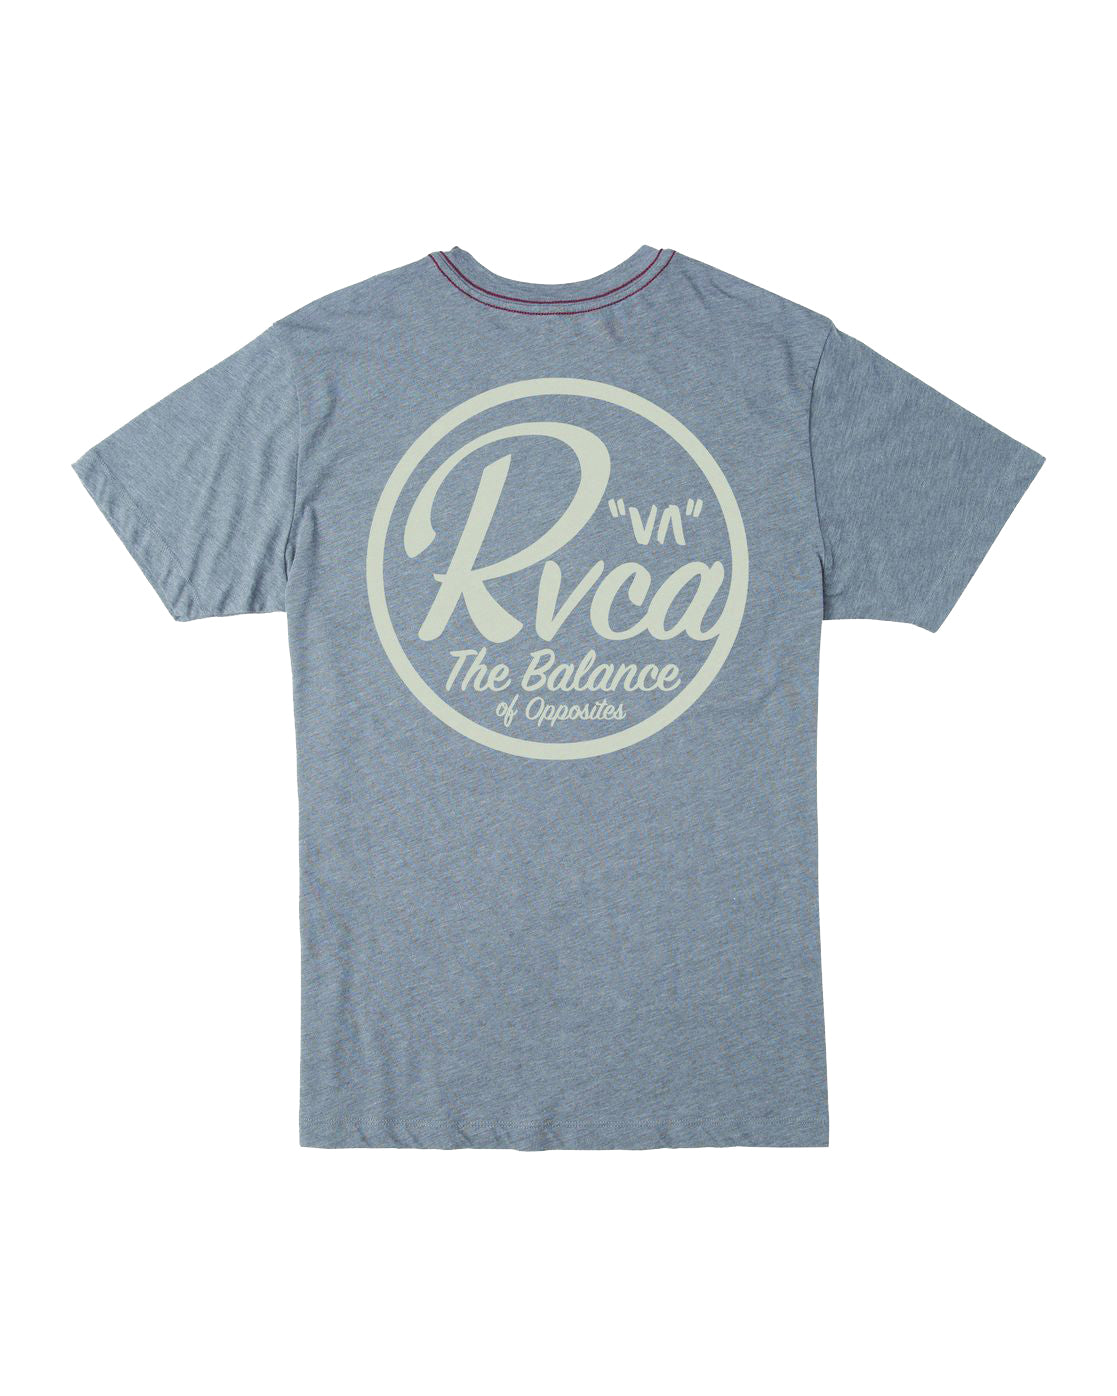 RVCA Patch Seal SS Tee